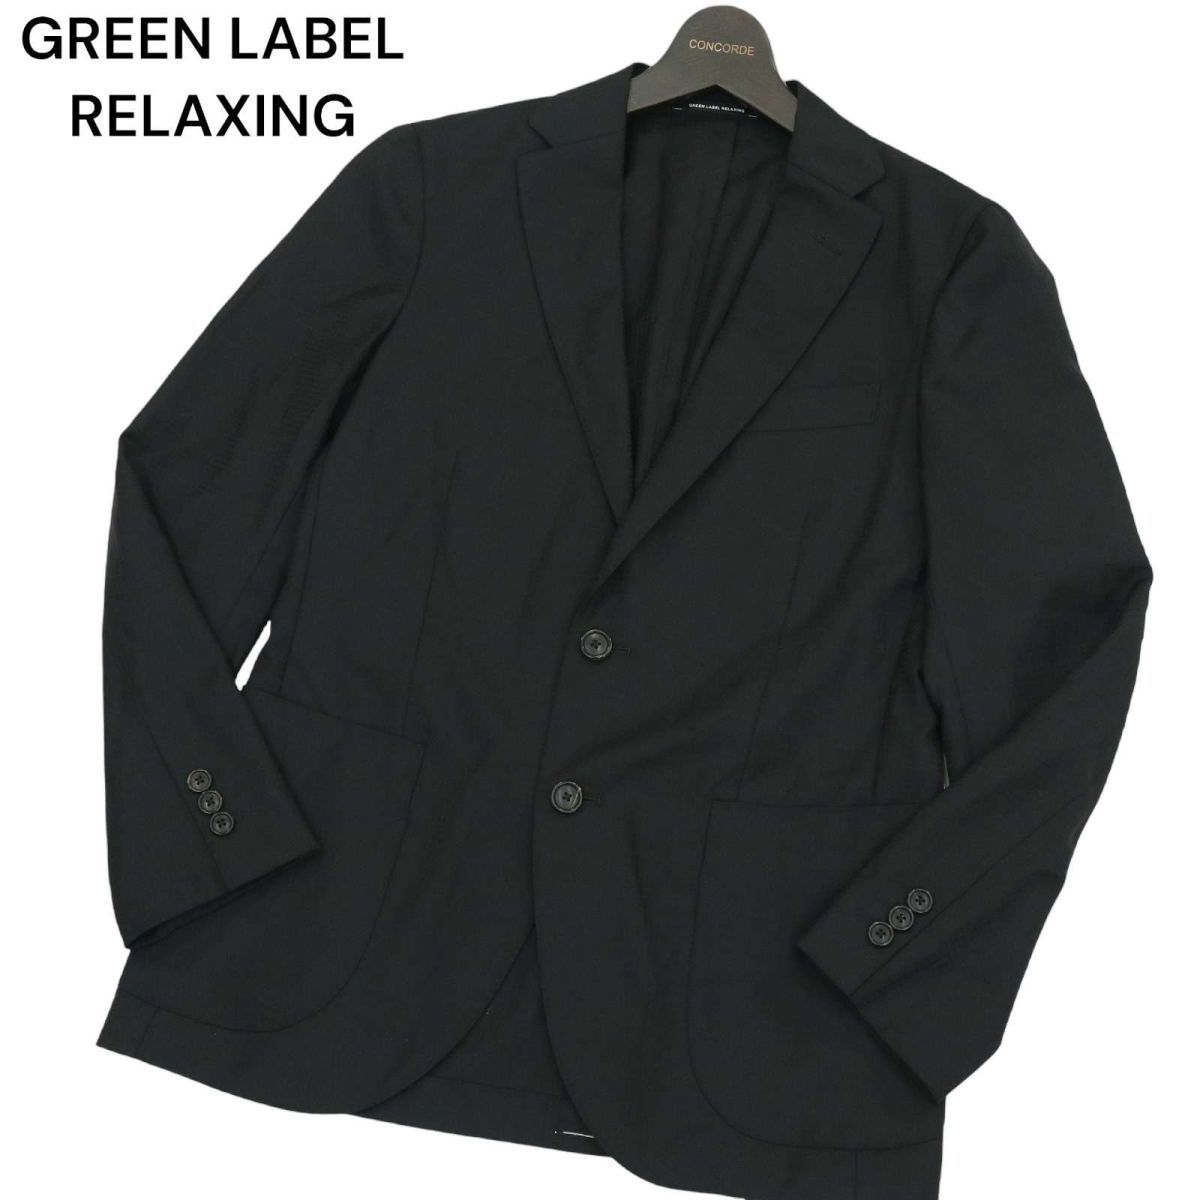 GREEN LABEL RELAXING United Arrows through year total pattern * Italy made kano Nico cloth tailored jacket Sz.44 men's black A3T10807_9#O